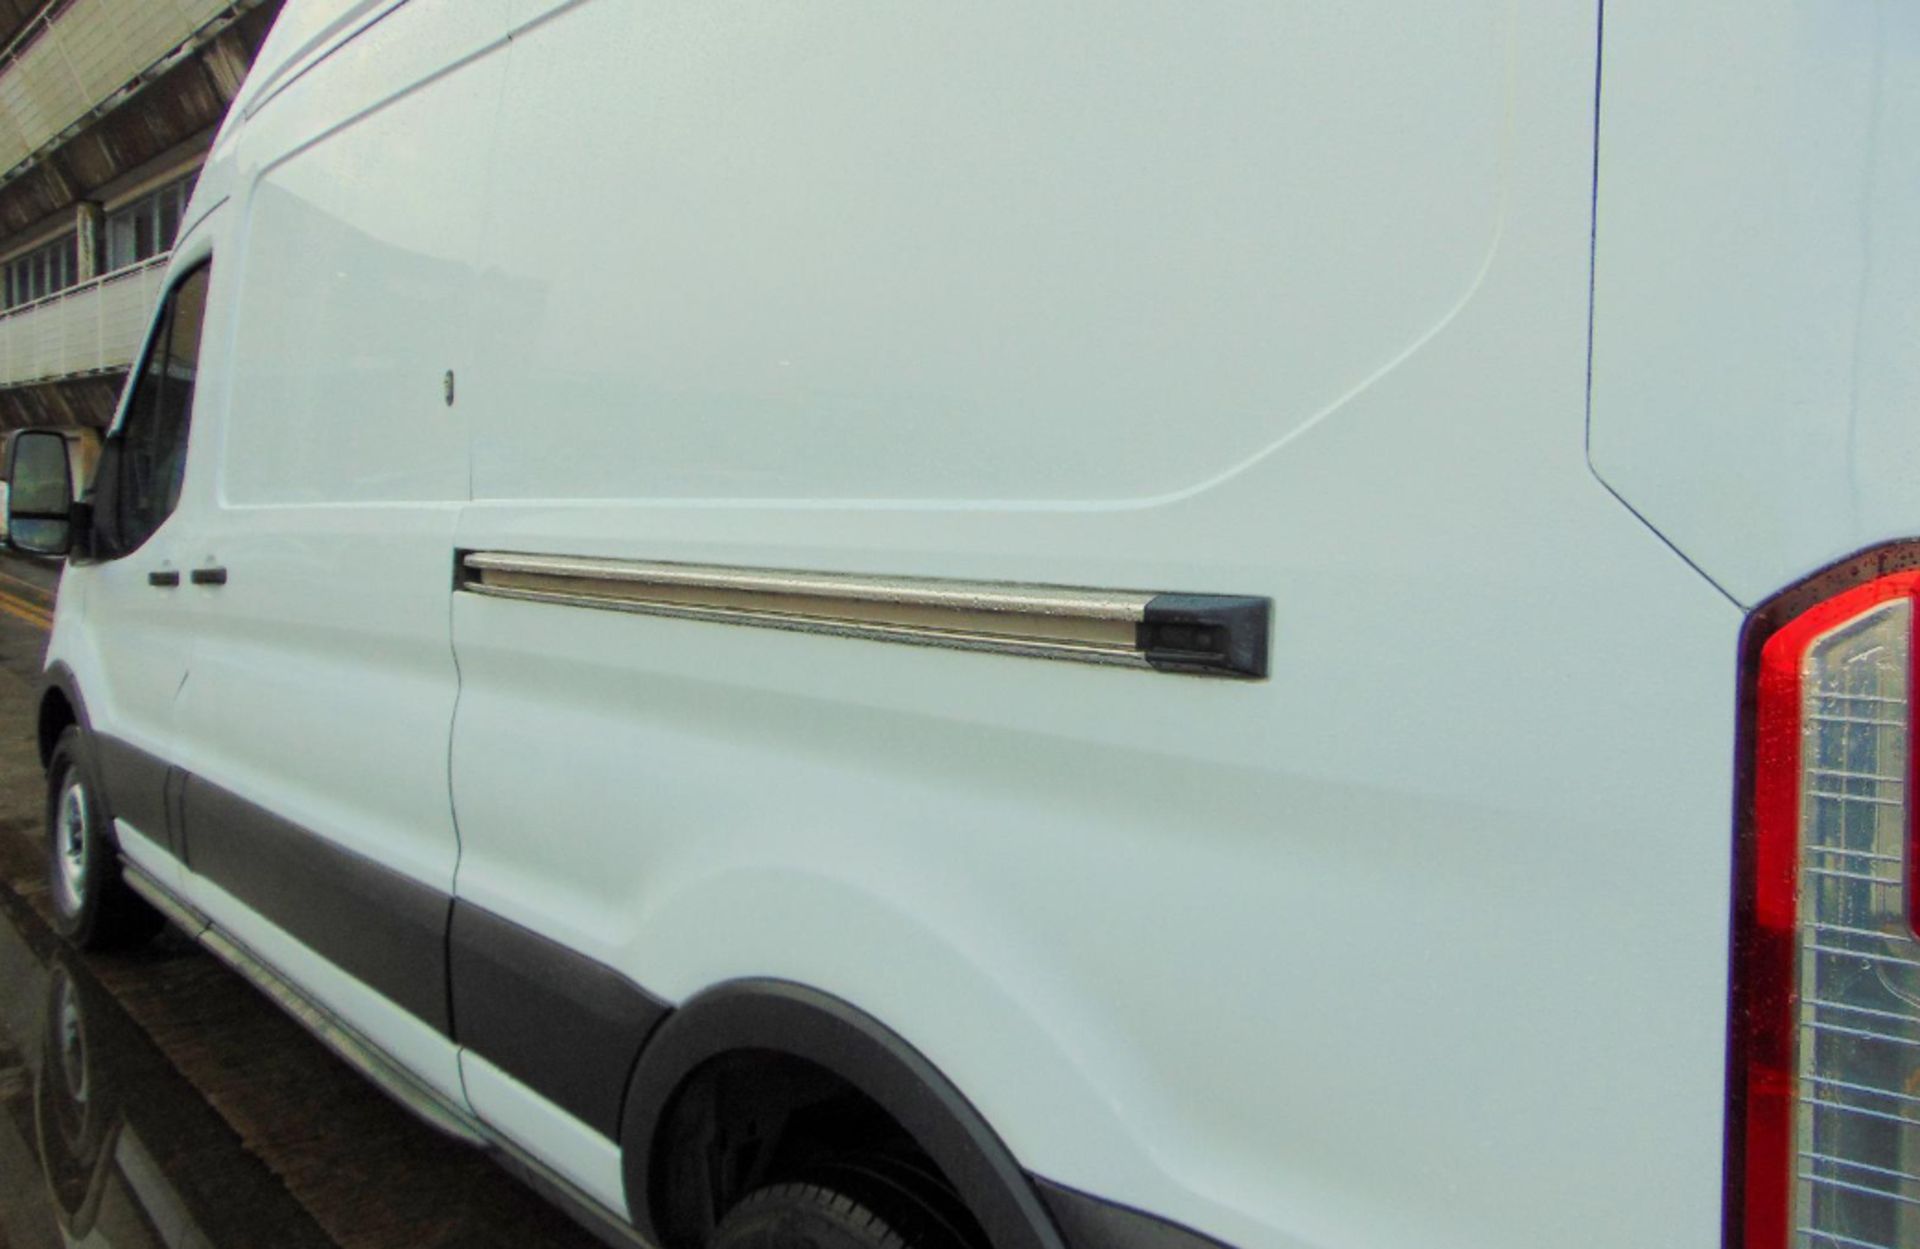 WORKHORSE ON WHEELS: FORD TRANSIT 2018, MANUAL, DIESEL, 3 SEATS, SERVICE HISTORY - Image 8 of 17